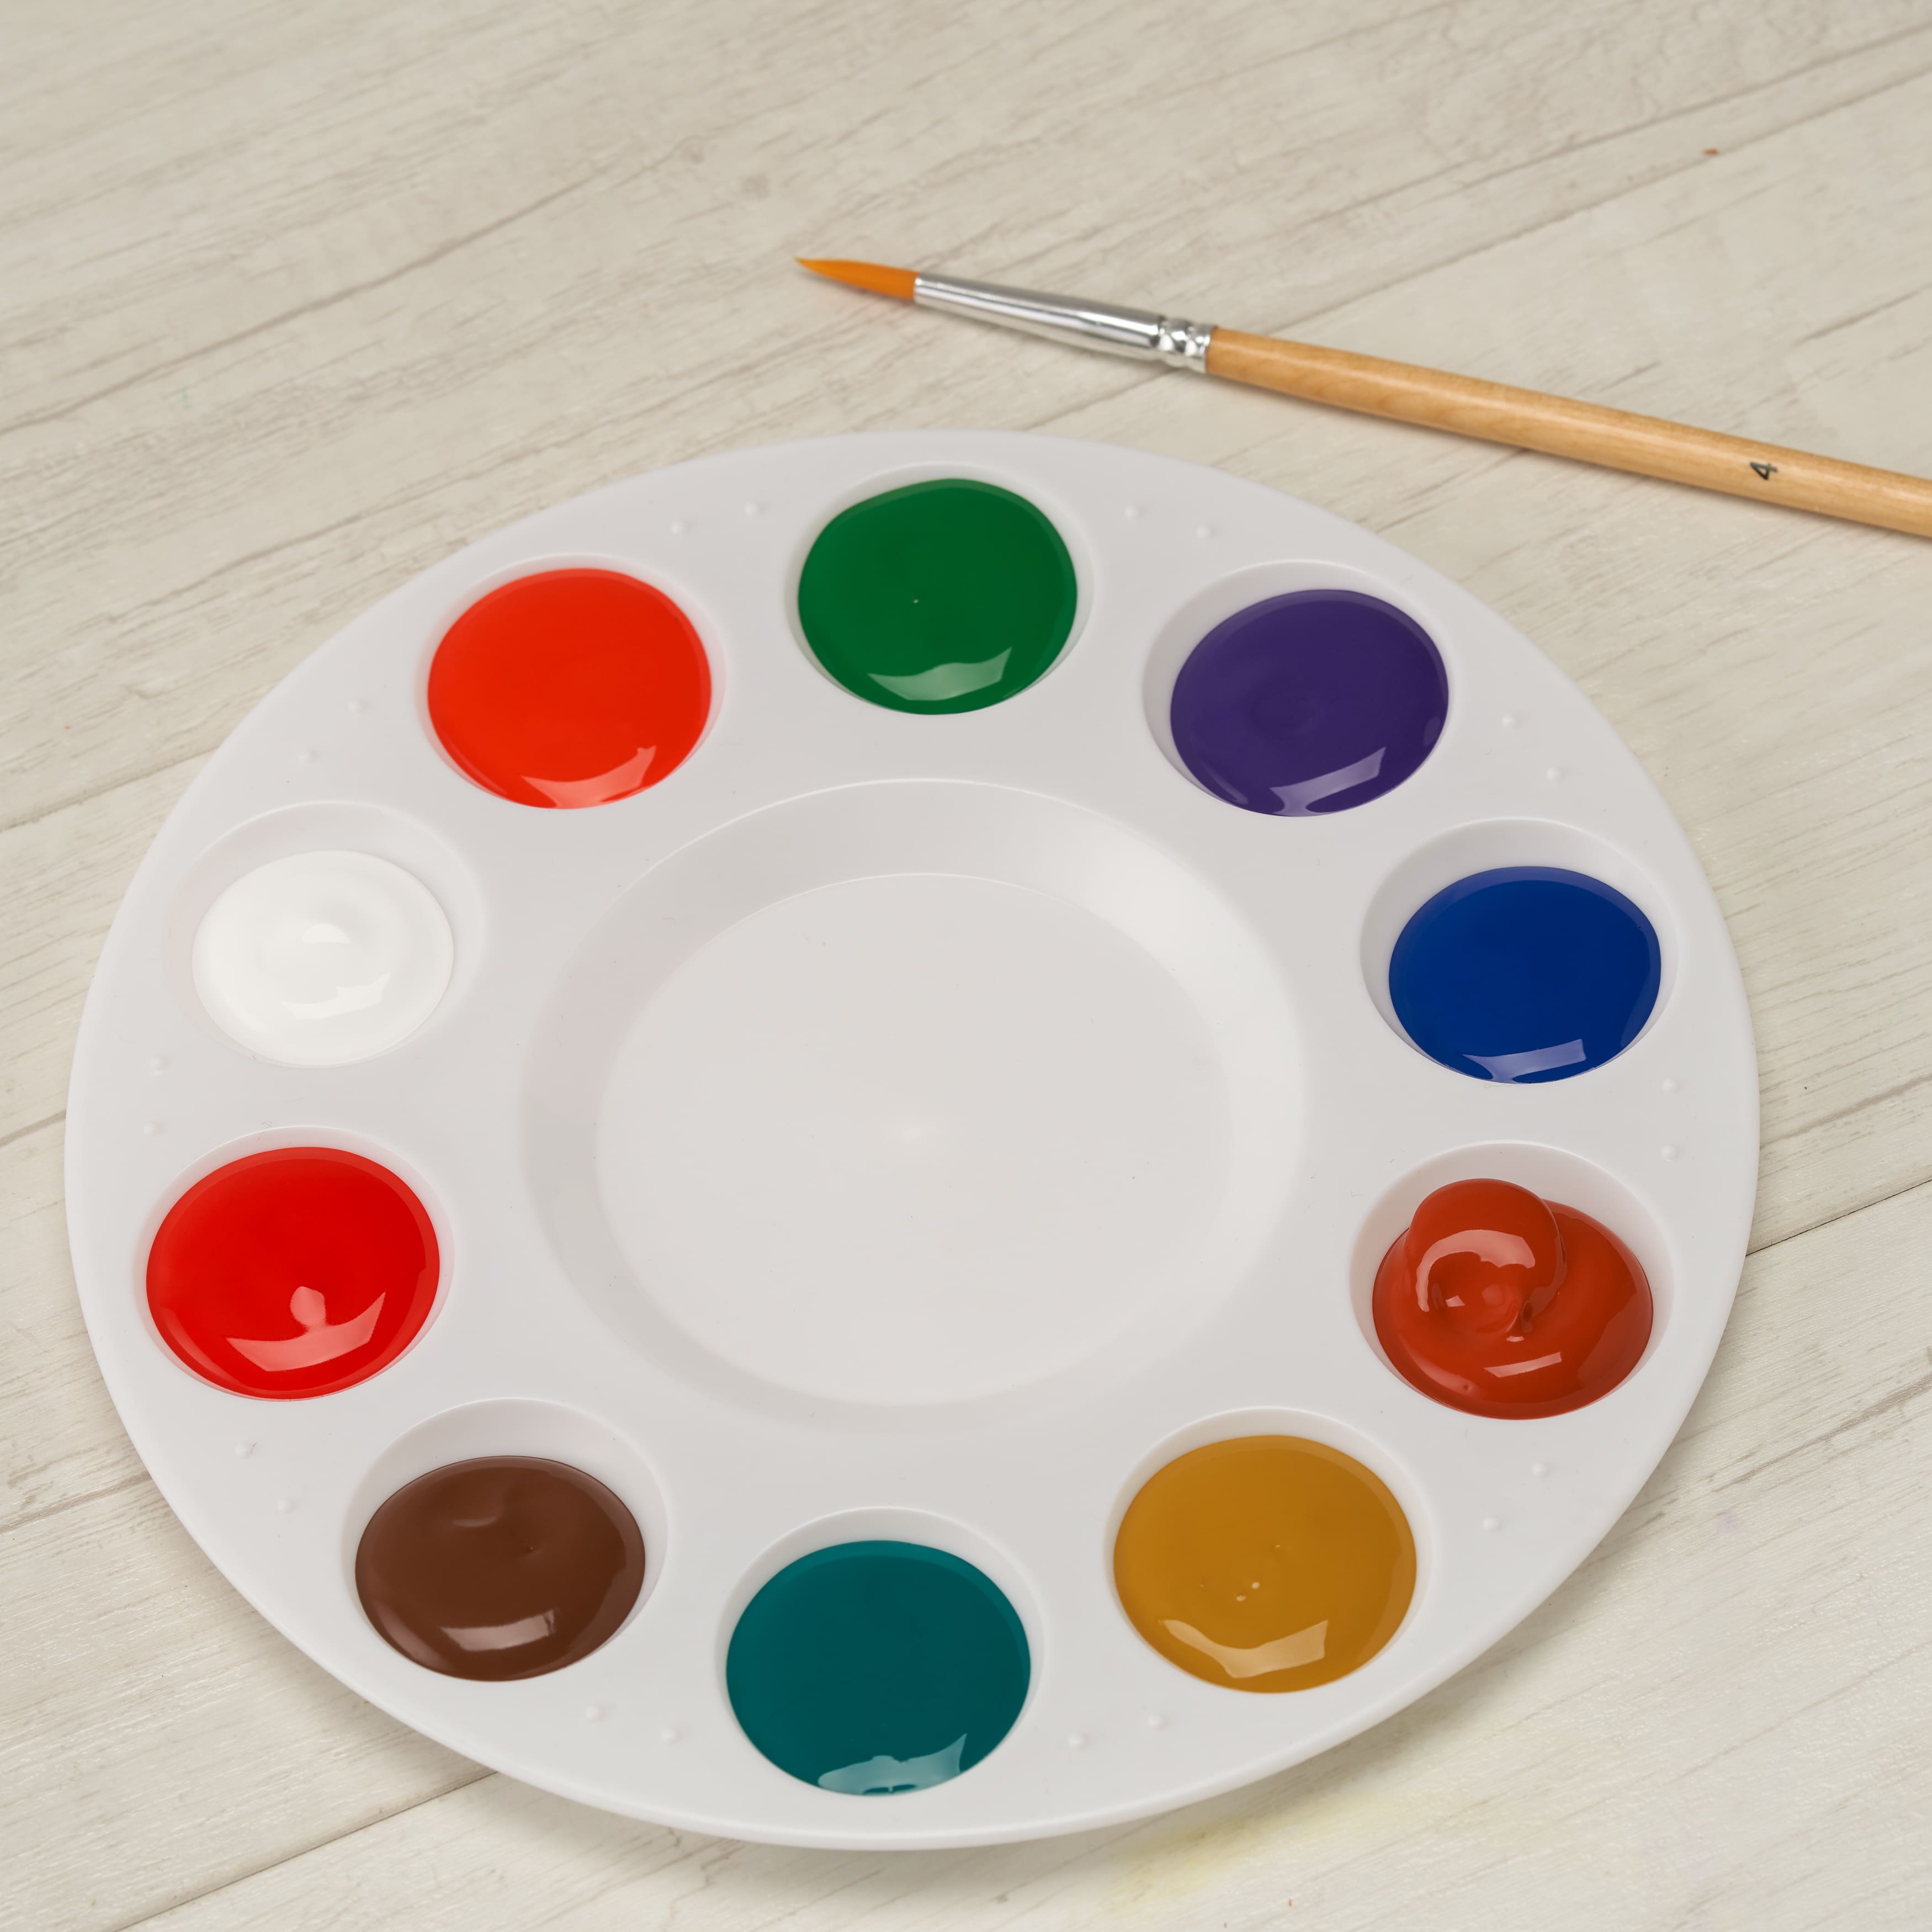 Round Artist Palette with Paints and Paint Brushes - Artist Palette -  Sticker